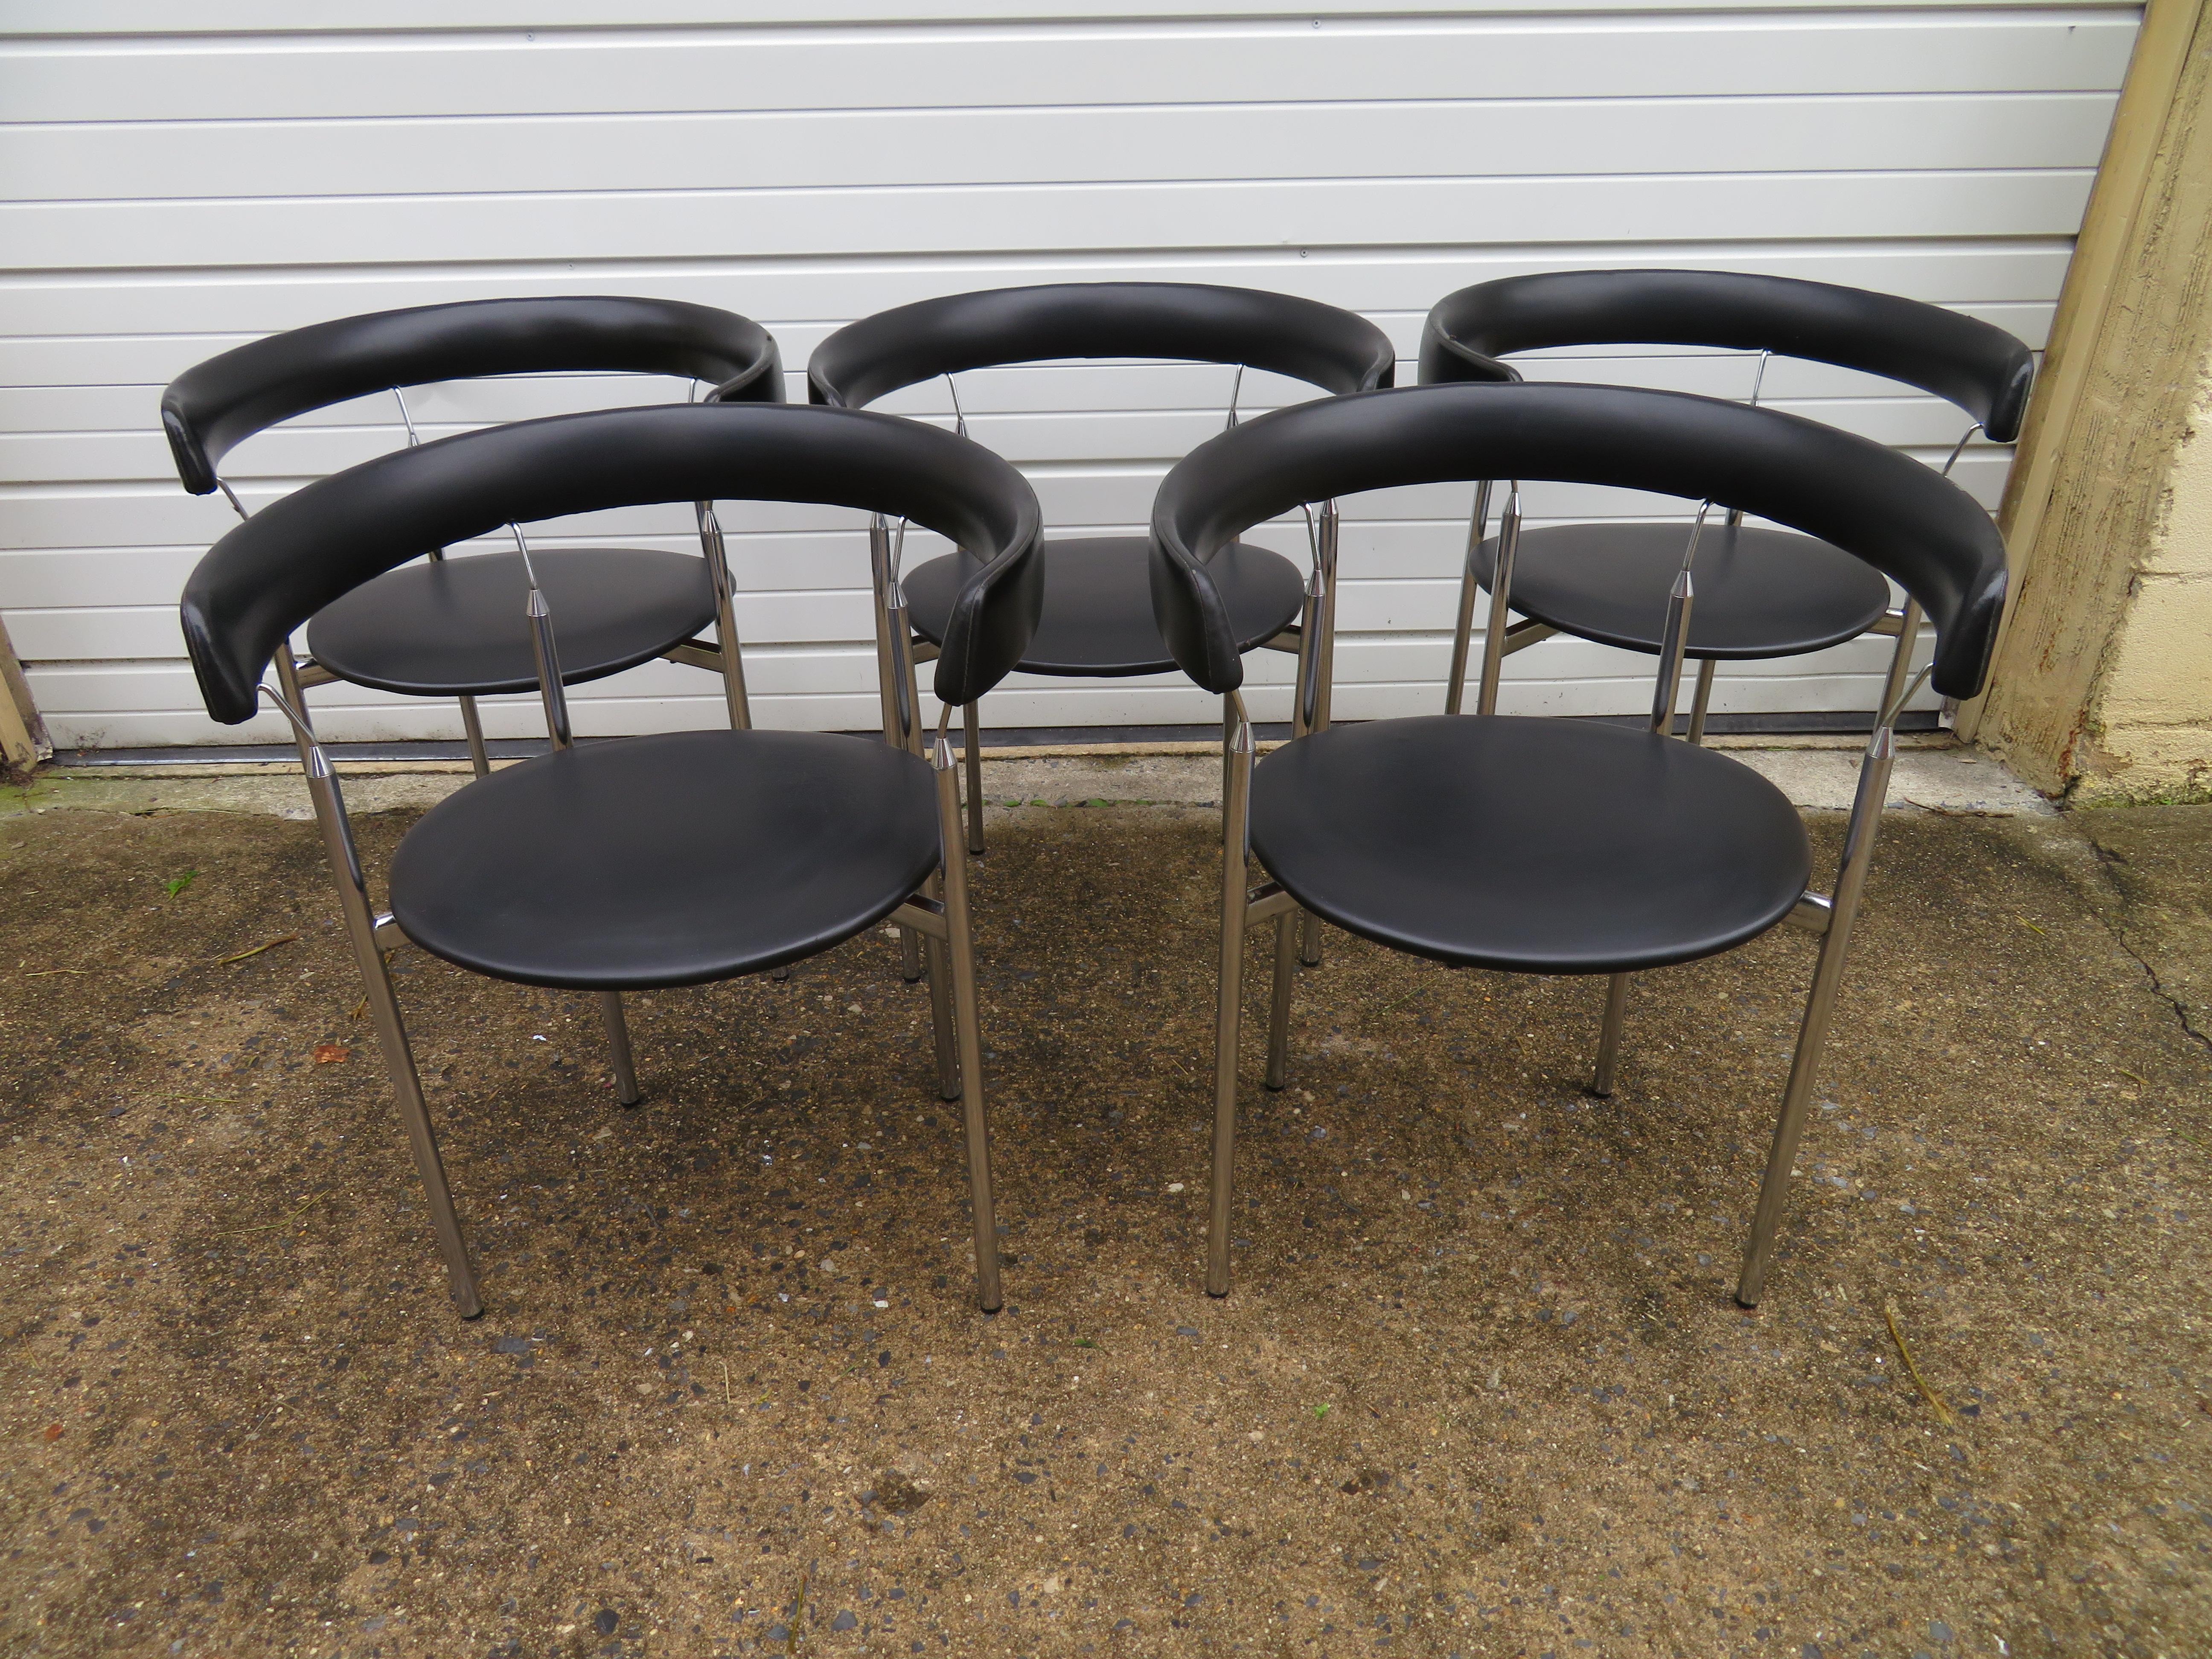 Wonderful set of five Poul Kjaerholm style barrel back dining chairs with their original ebonized drum base dining table. The chairs retain their original black faux leather in nice vintage condition-only a few minor marks. We love how the chairs